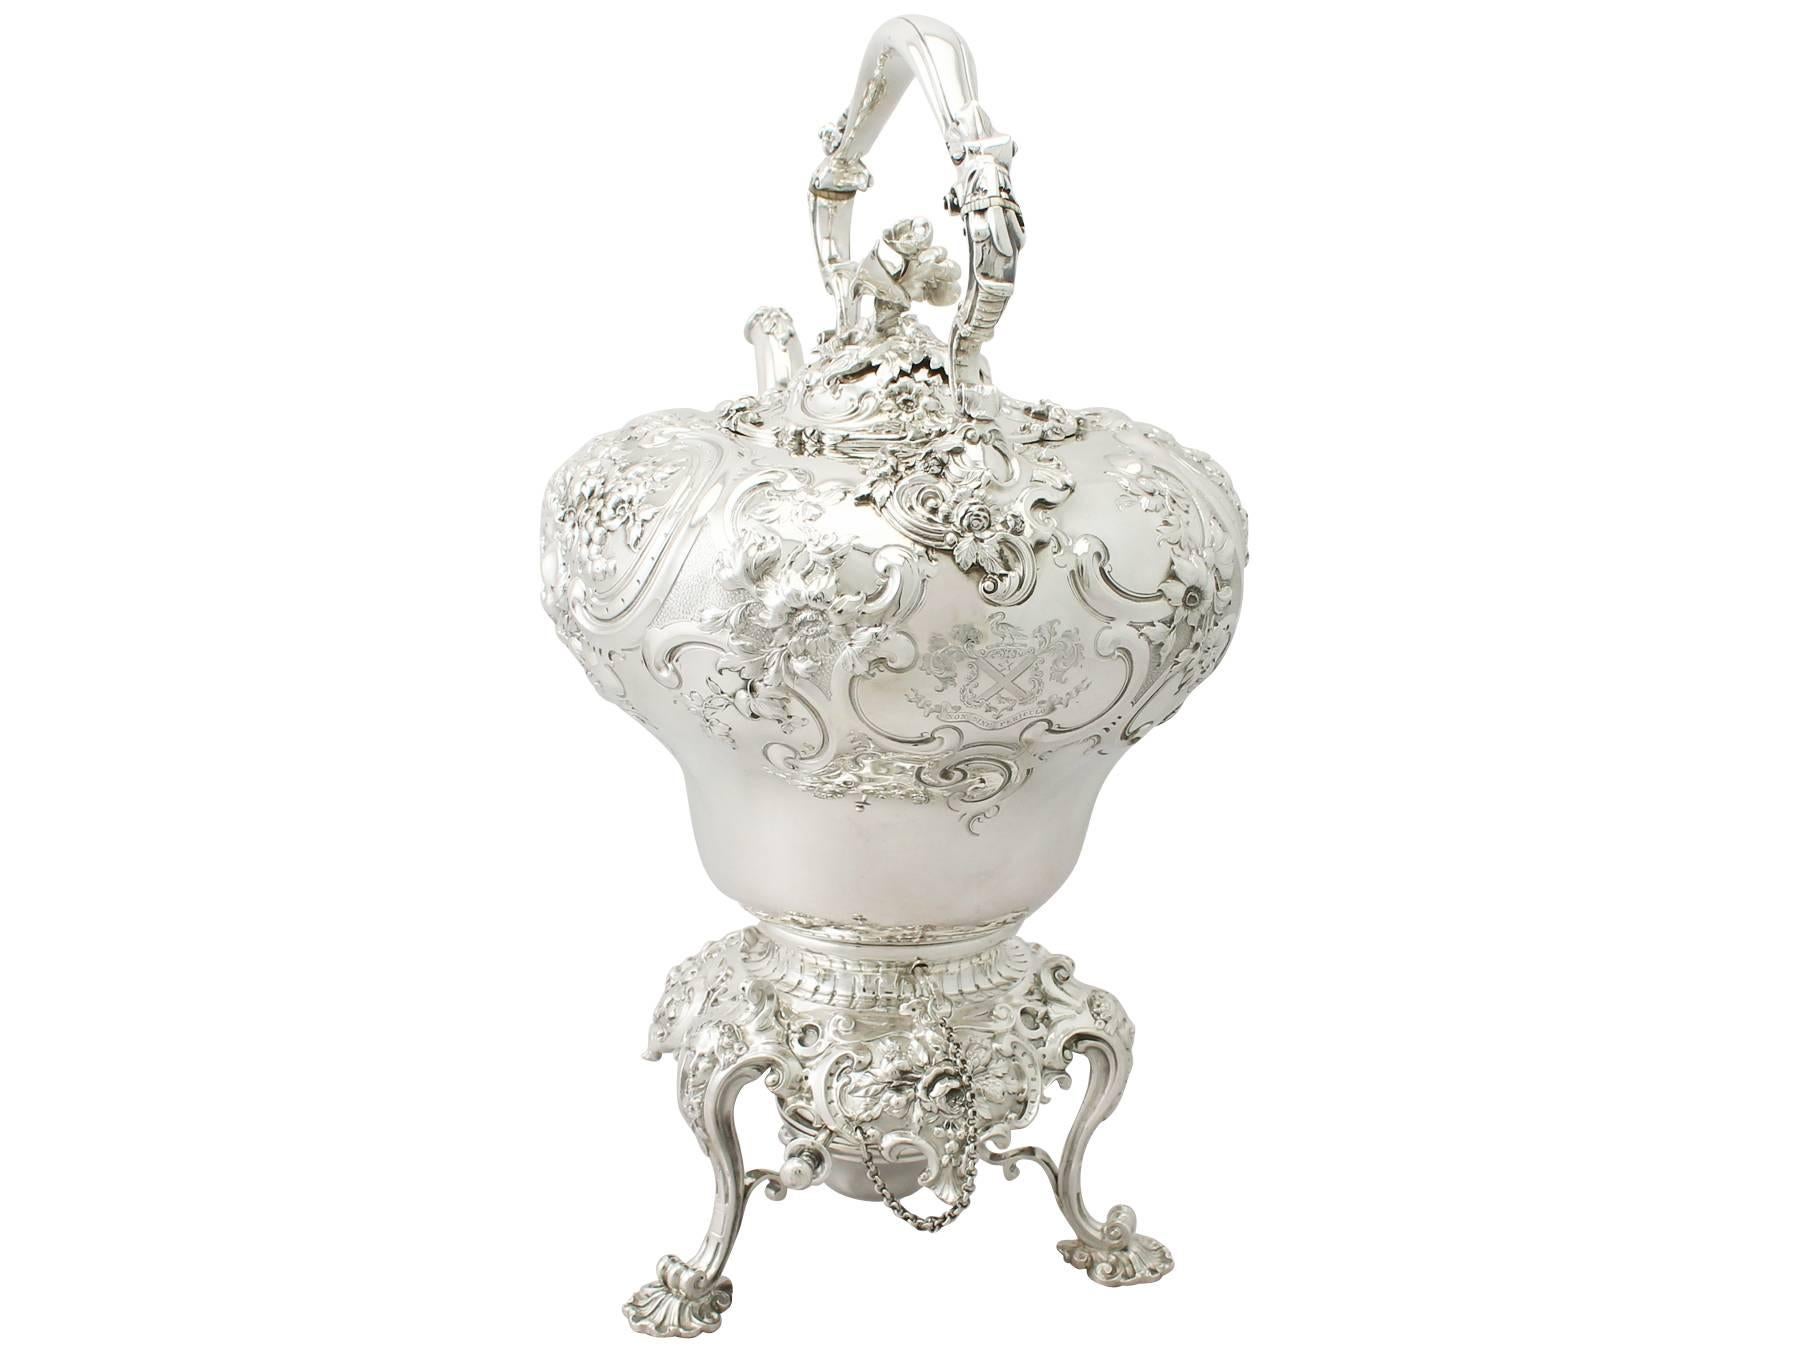 A magnificent, fine and impressive, antique Victorian English sterling silver spirit kettle made by John Samuel Hun, an addition to our antique silver tea ware collection

This magnificent antique Victorian sterling silver spirit kettle has a